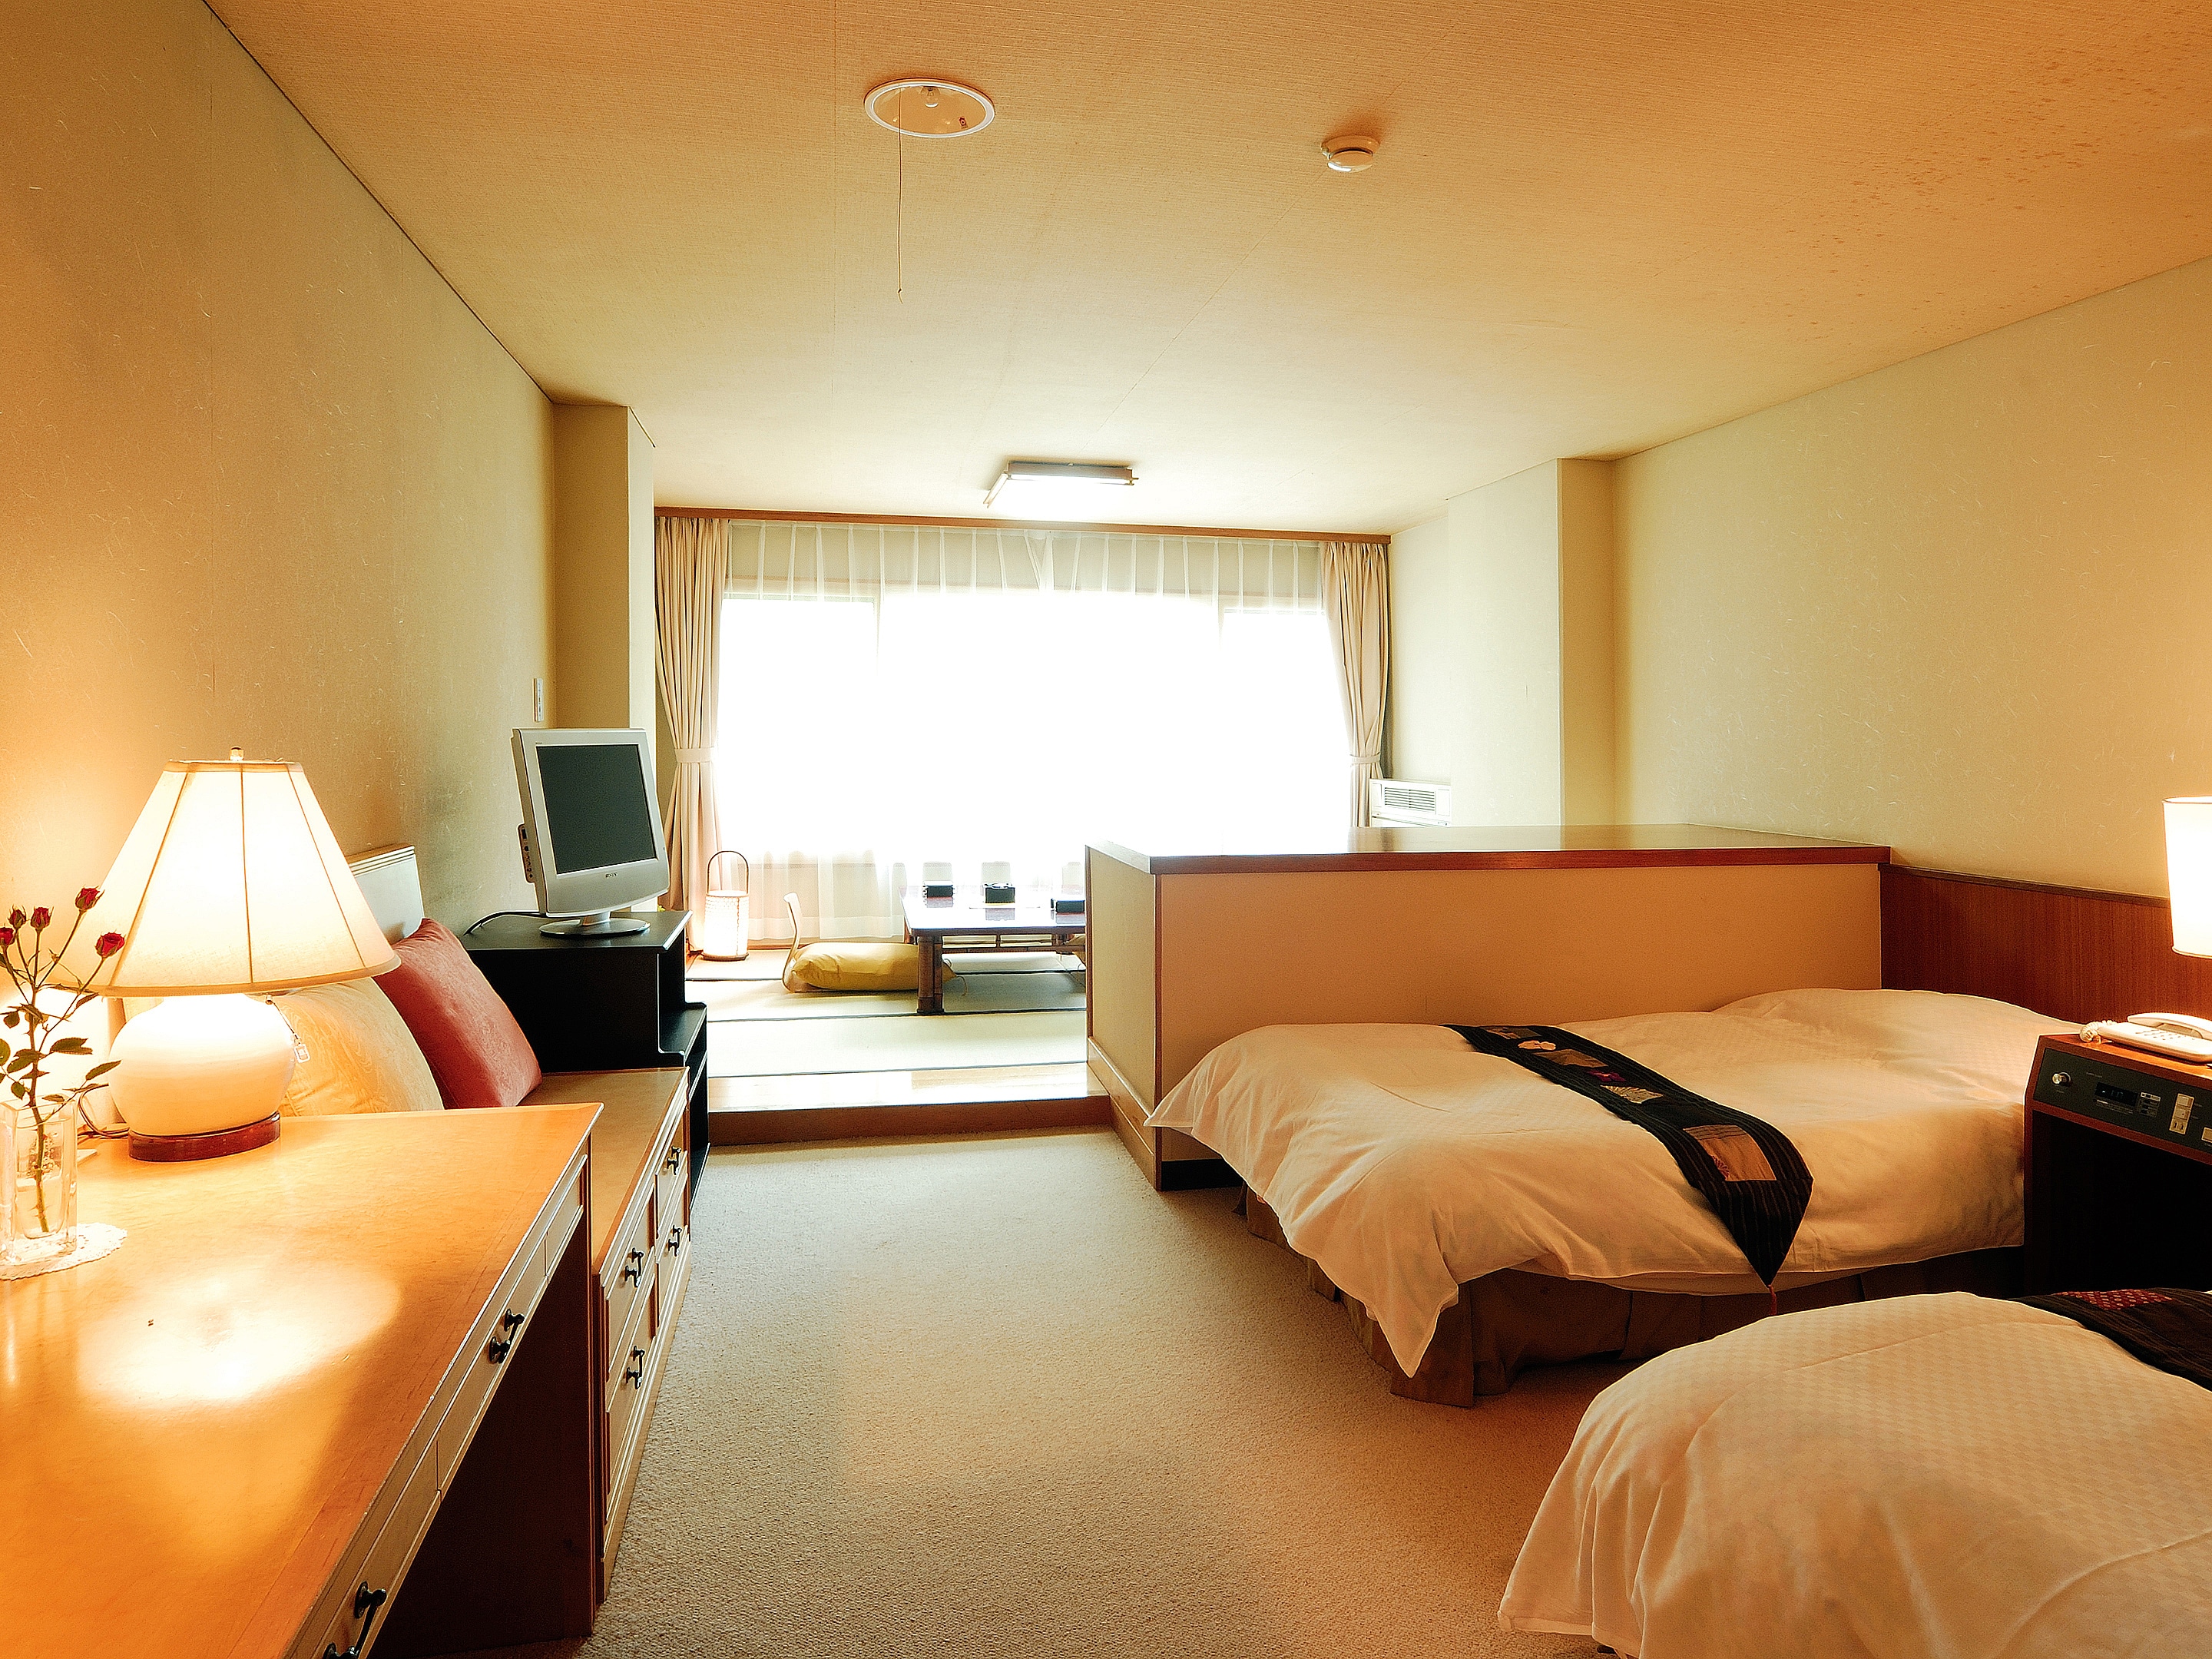 General guest room 35㎡ Japanese-style room 6 tatami mats + twin beds